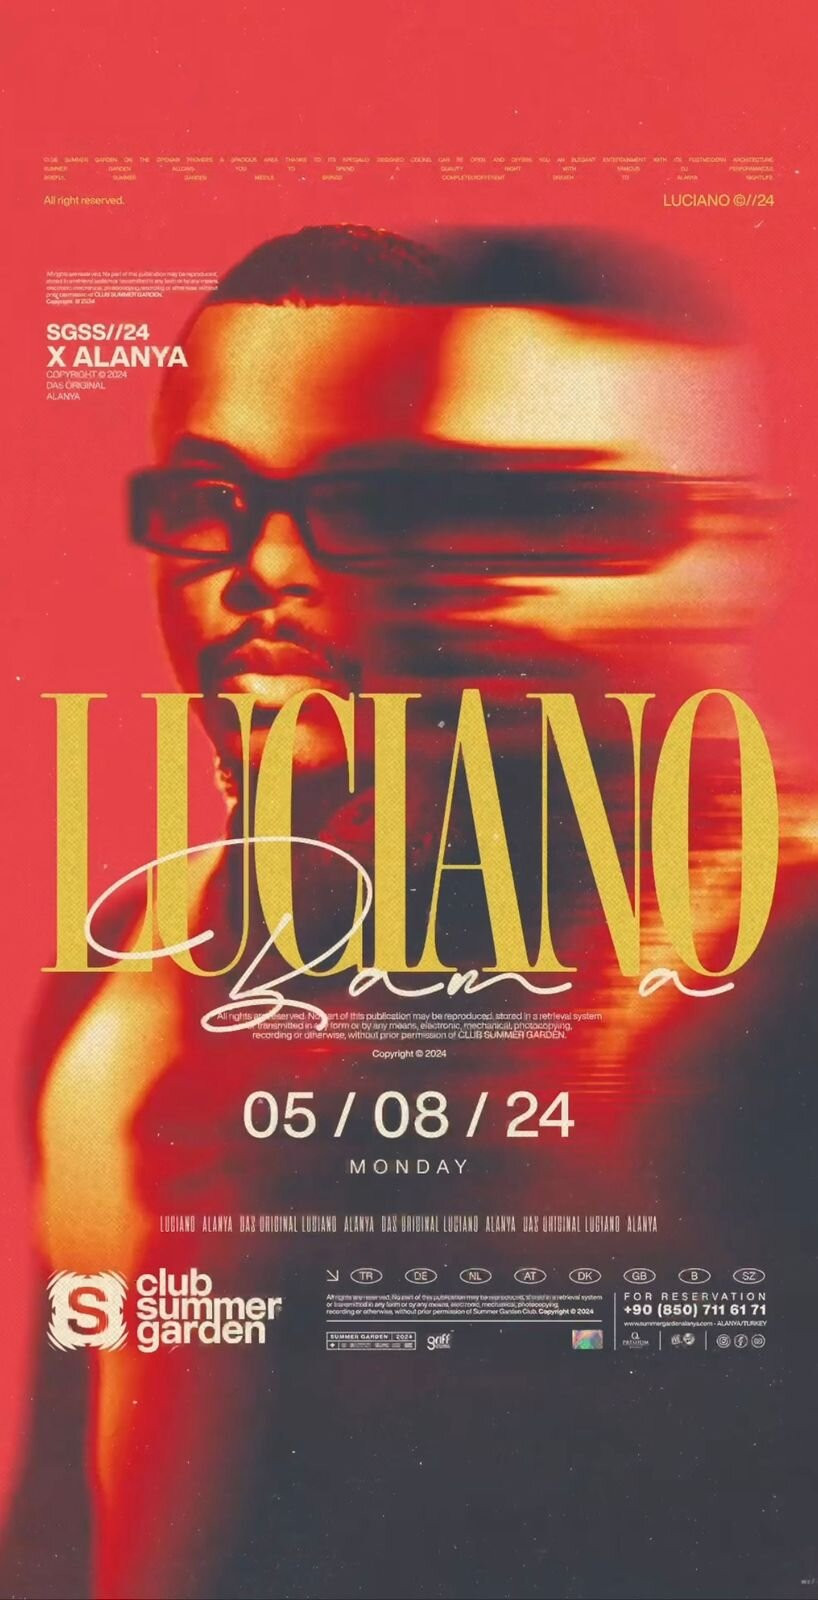 On August 5th, Luciano's concert at Summer Garden Club